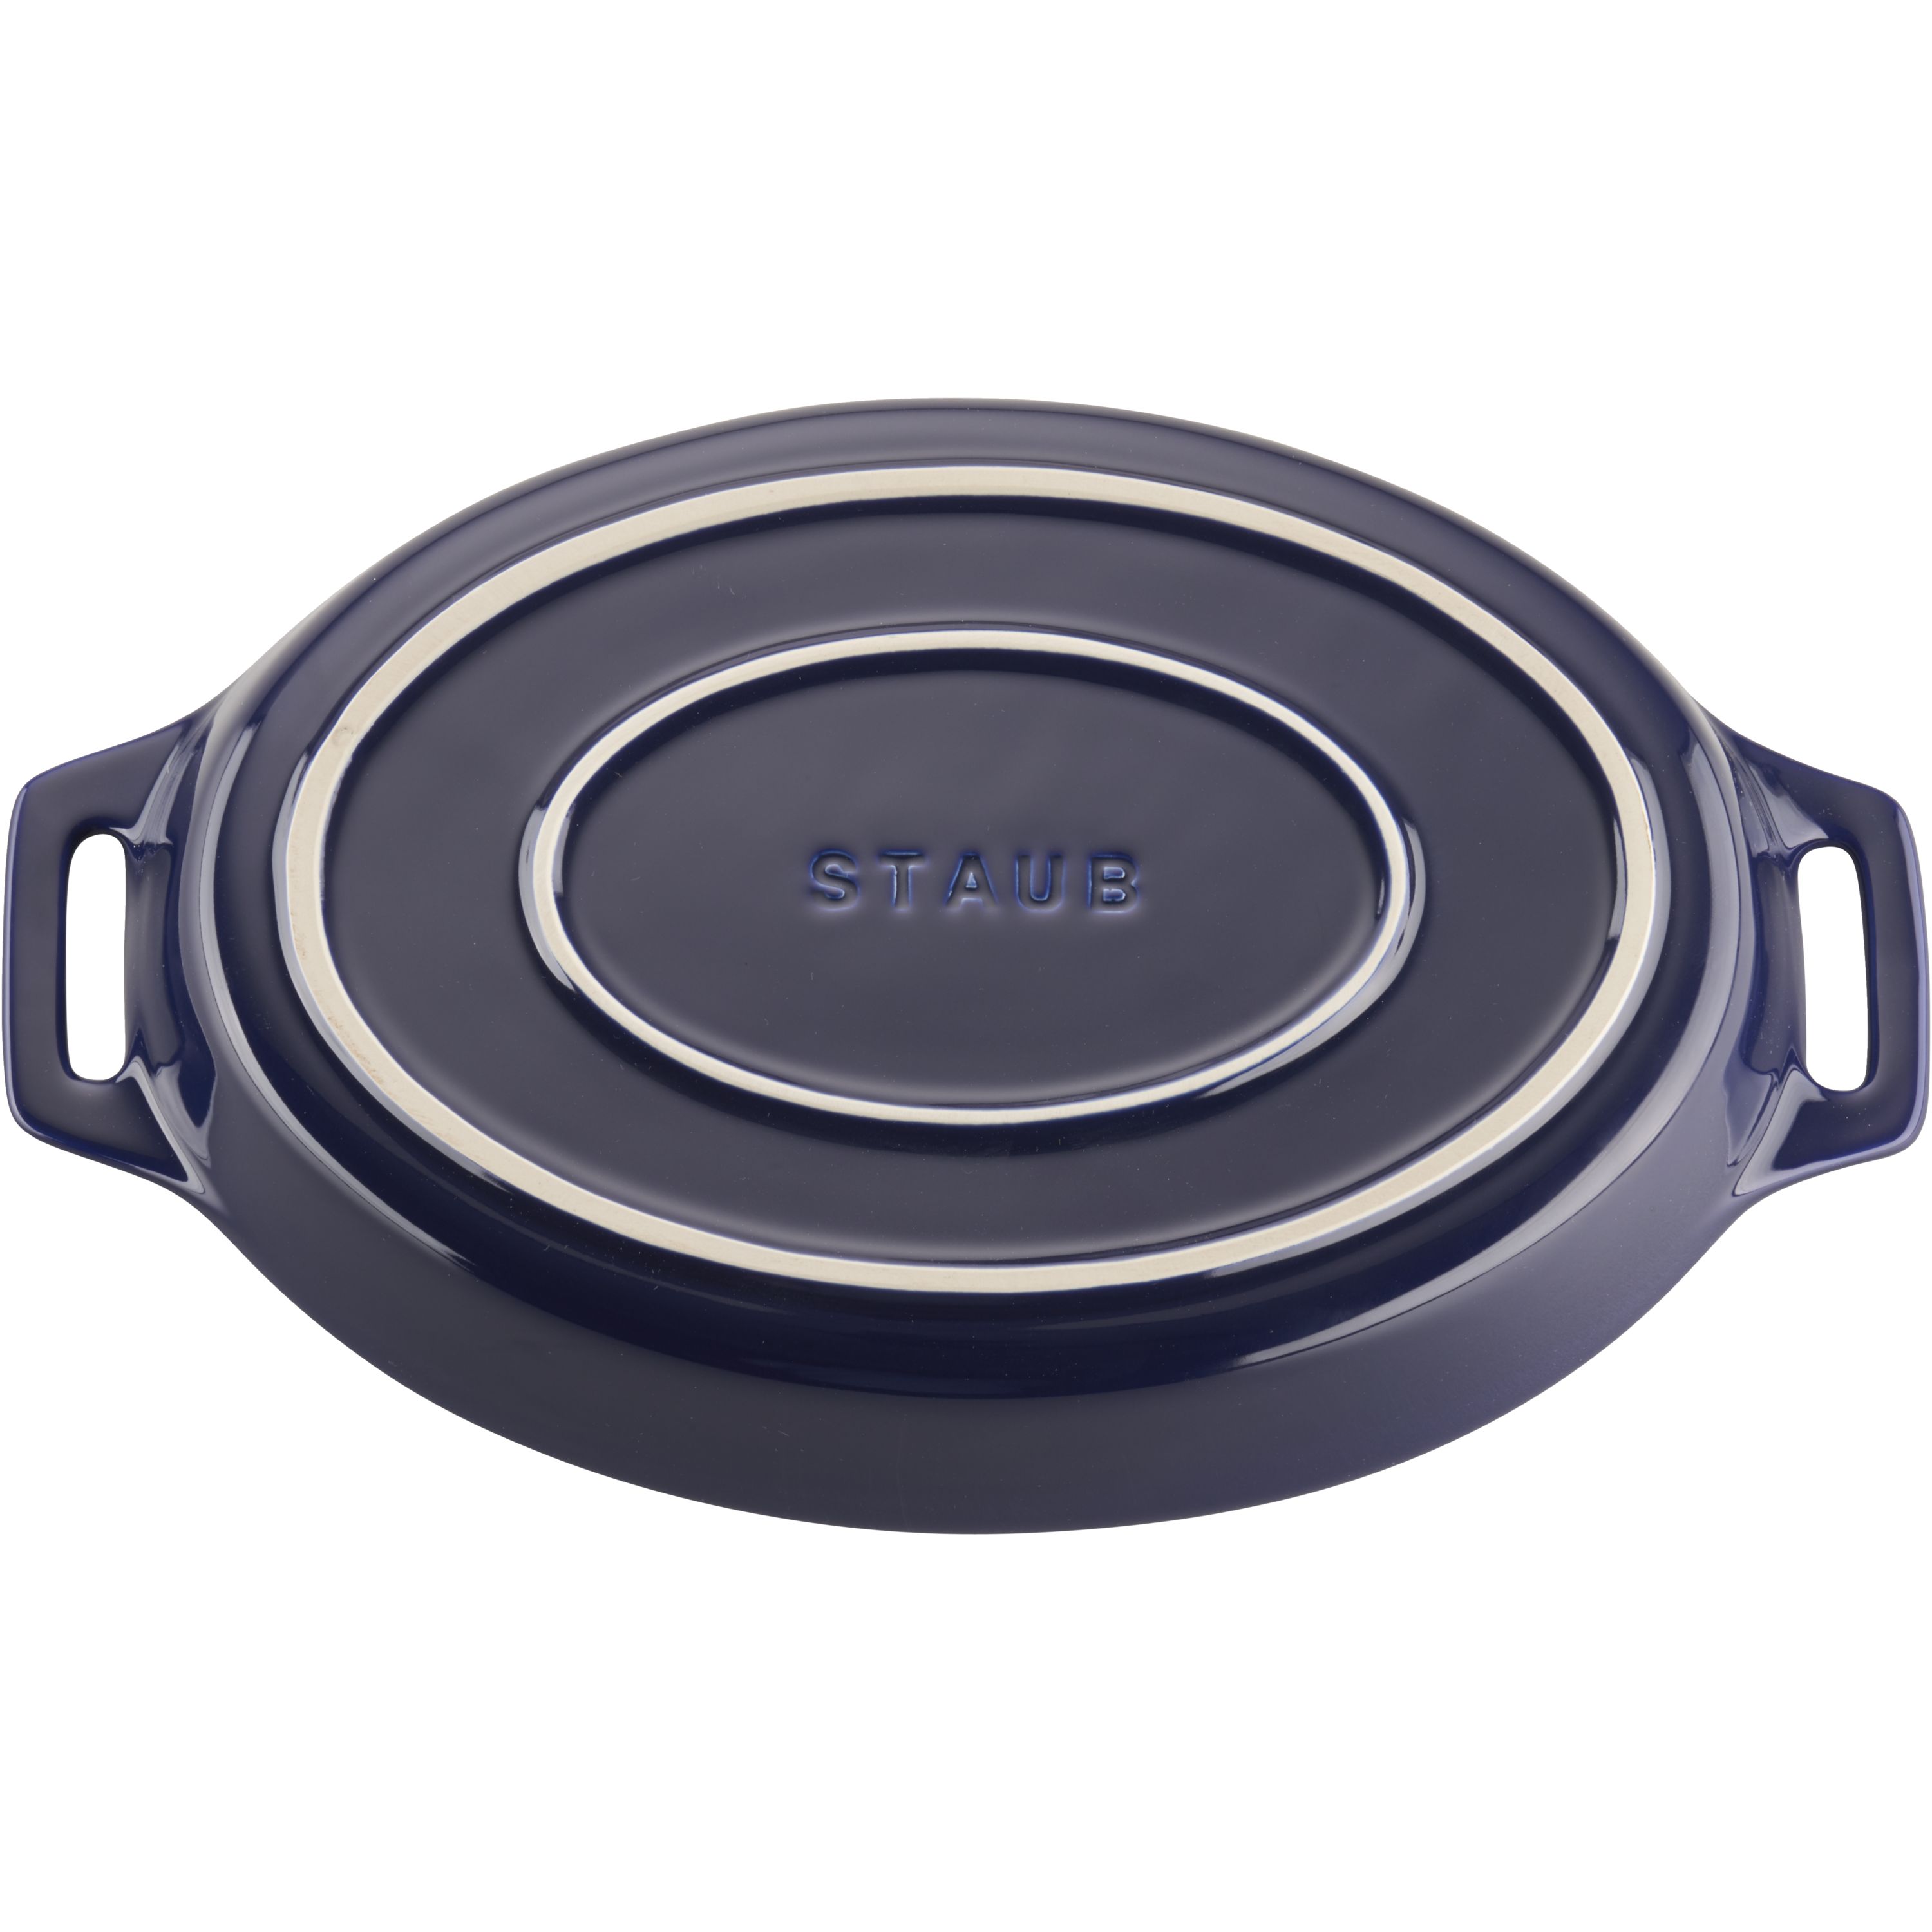 Staub Cooking pot set 24 cm with pan and lid 4 el. - 40508-386-0